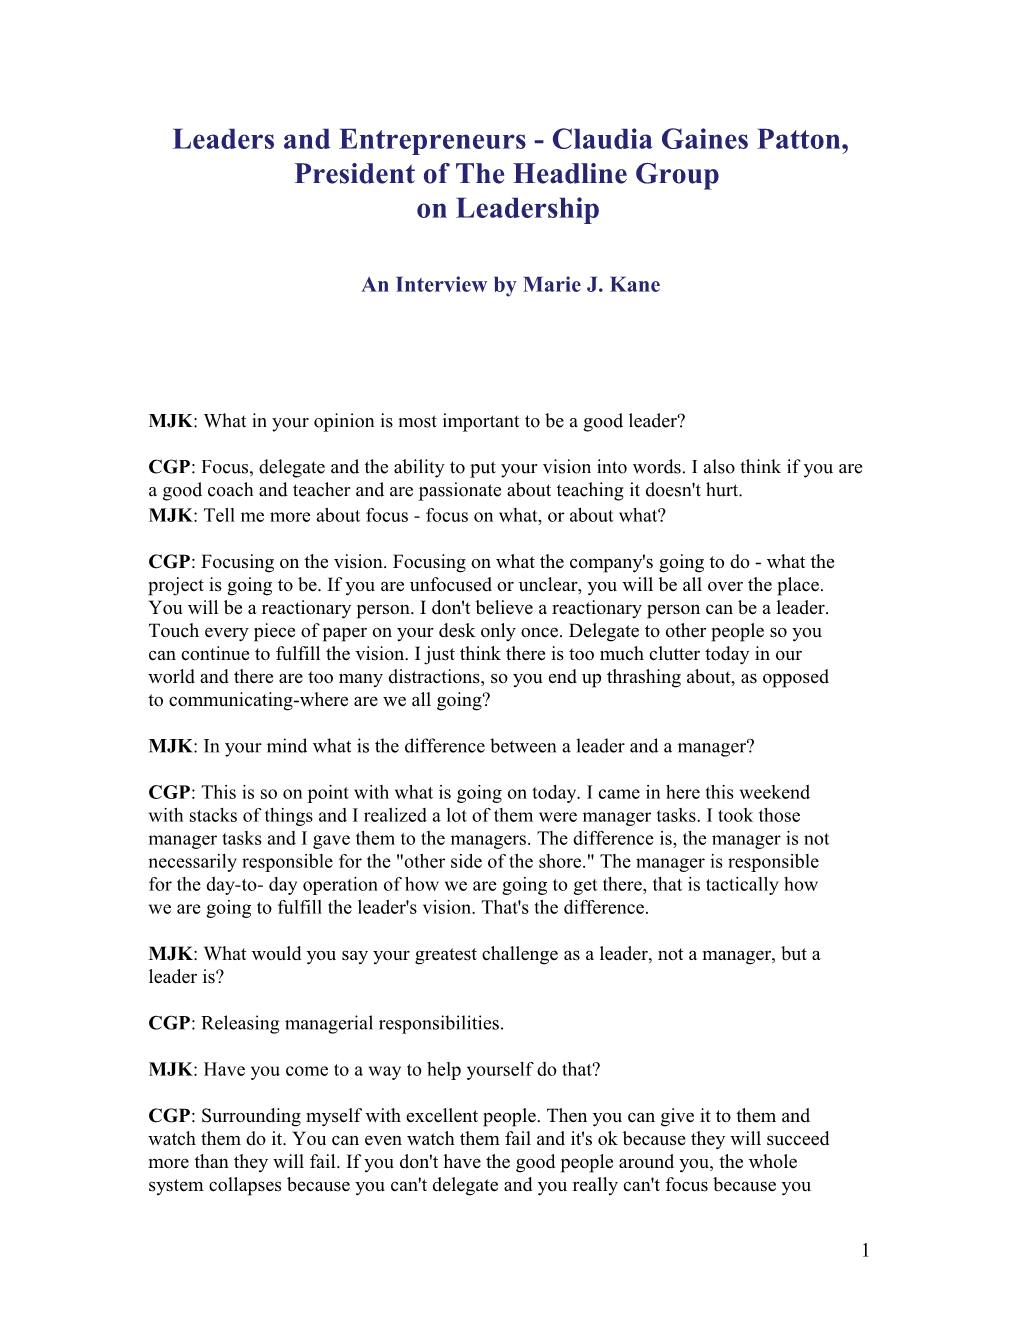 Leaders and Entrepreneurs - Claudia Gaines Patton, President of the Headline Group